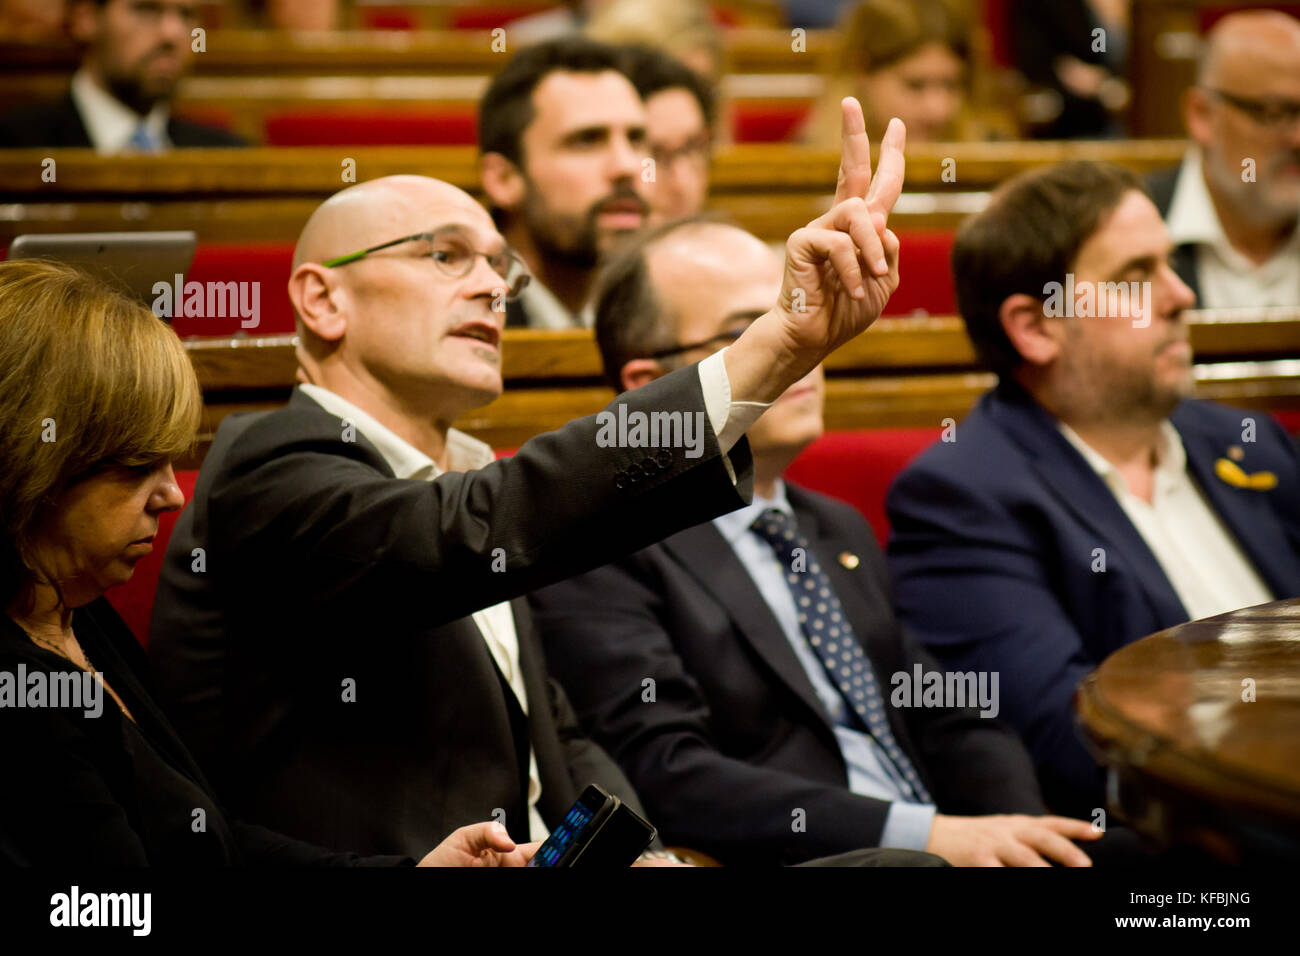 Barcelona, Spain. 26th Oct, 2017. Catalan Exteriors Minister Raul Romeva gestures at the plenary room of the Catalonian Parliament during the debate on 155 constitution article application by Spanish government. Credit:  Jordi Boixareu/Alamy Live News Stock Photo